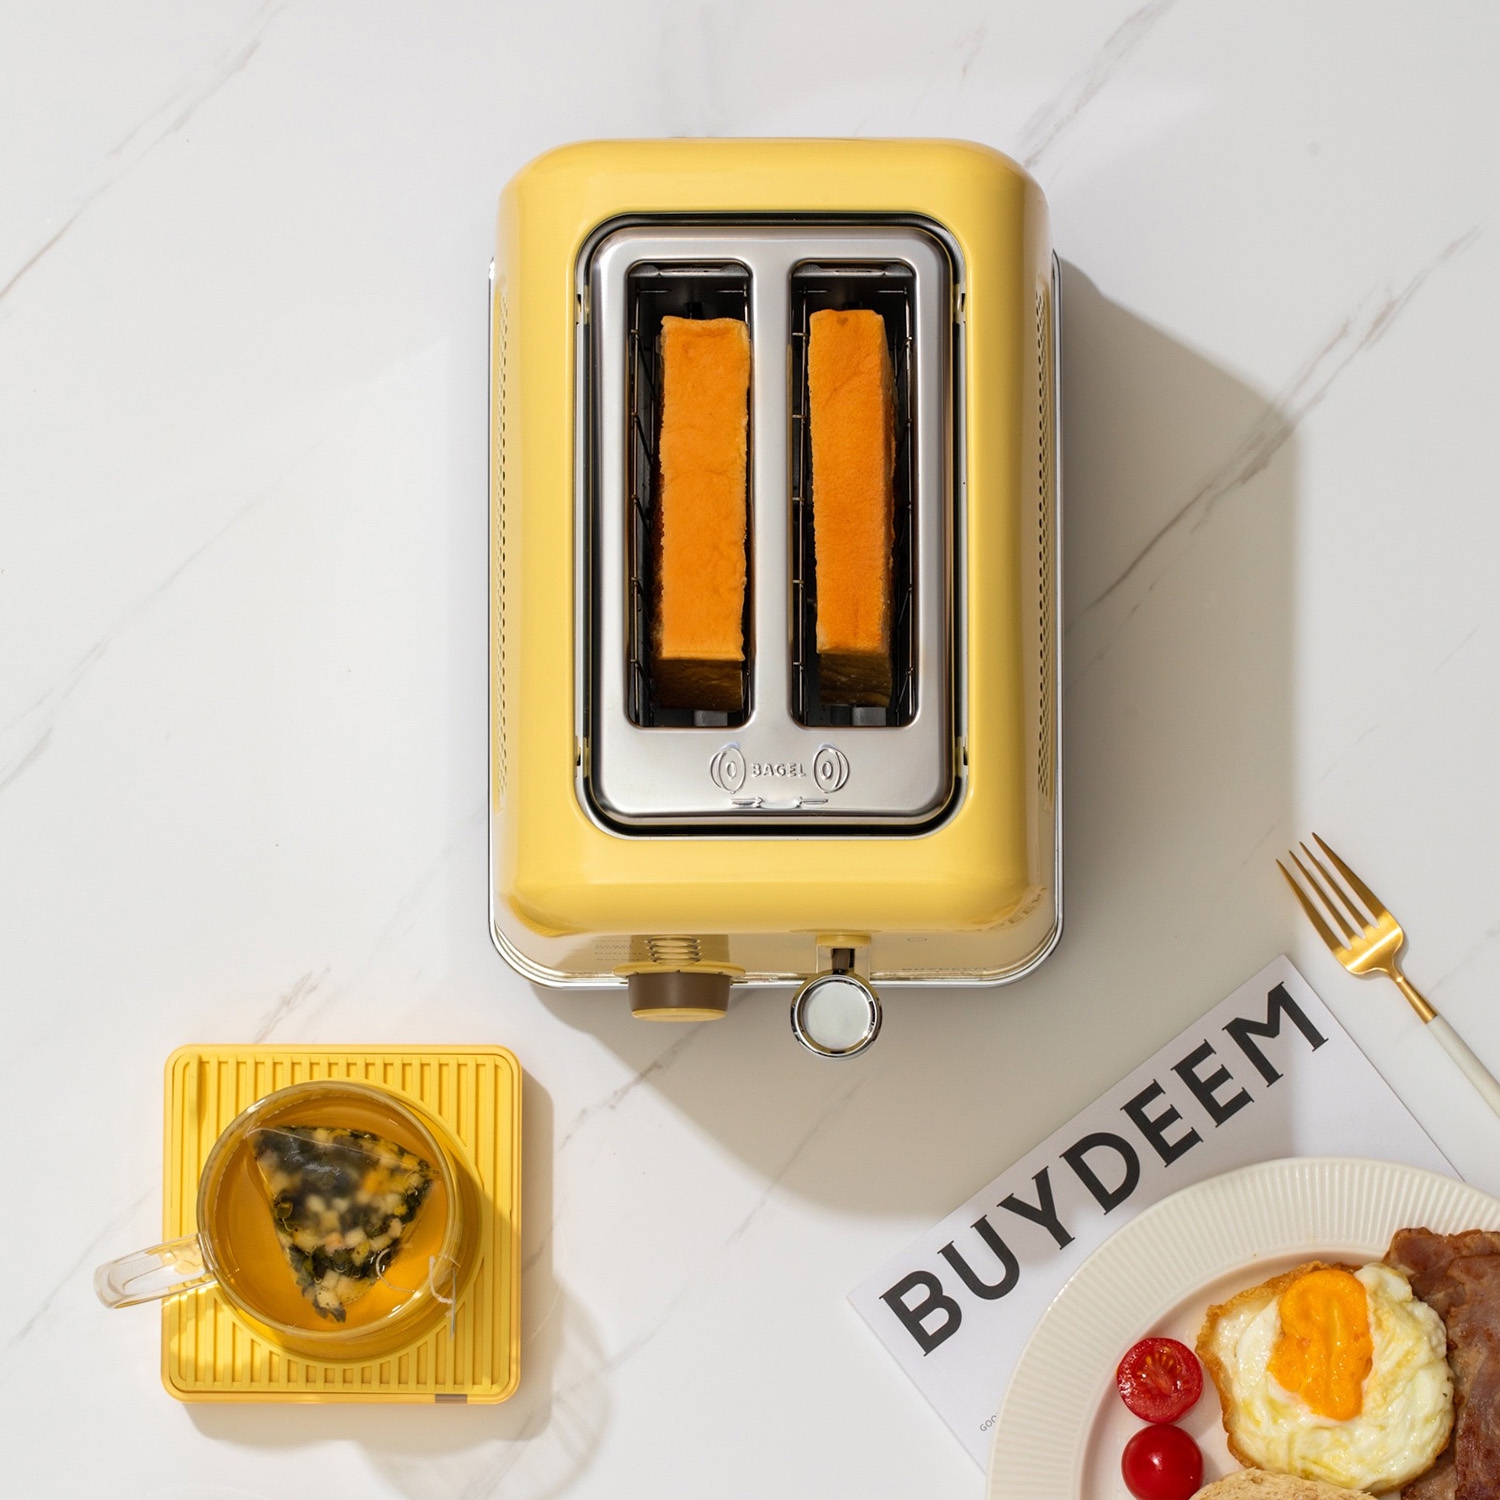 Bd61057 Buydeem 2-Slice Toaster Mellow Yellow Dt620E – Robinsons